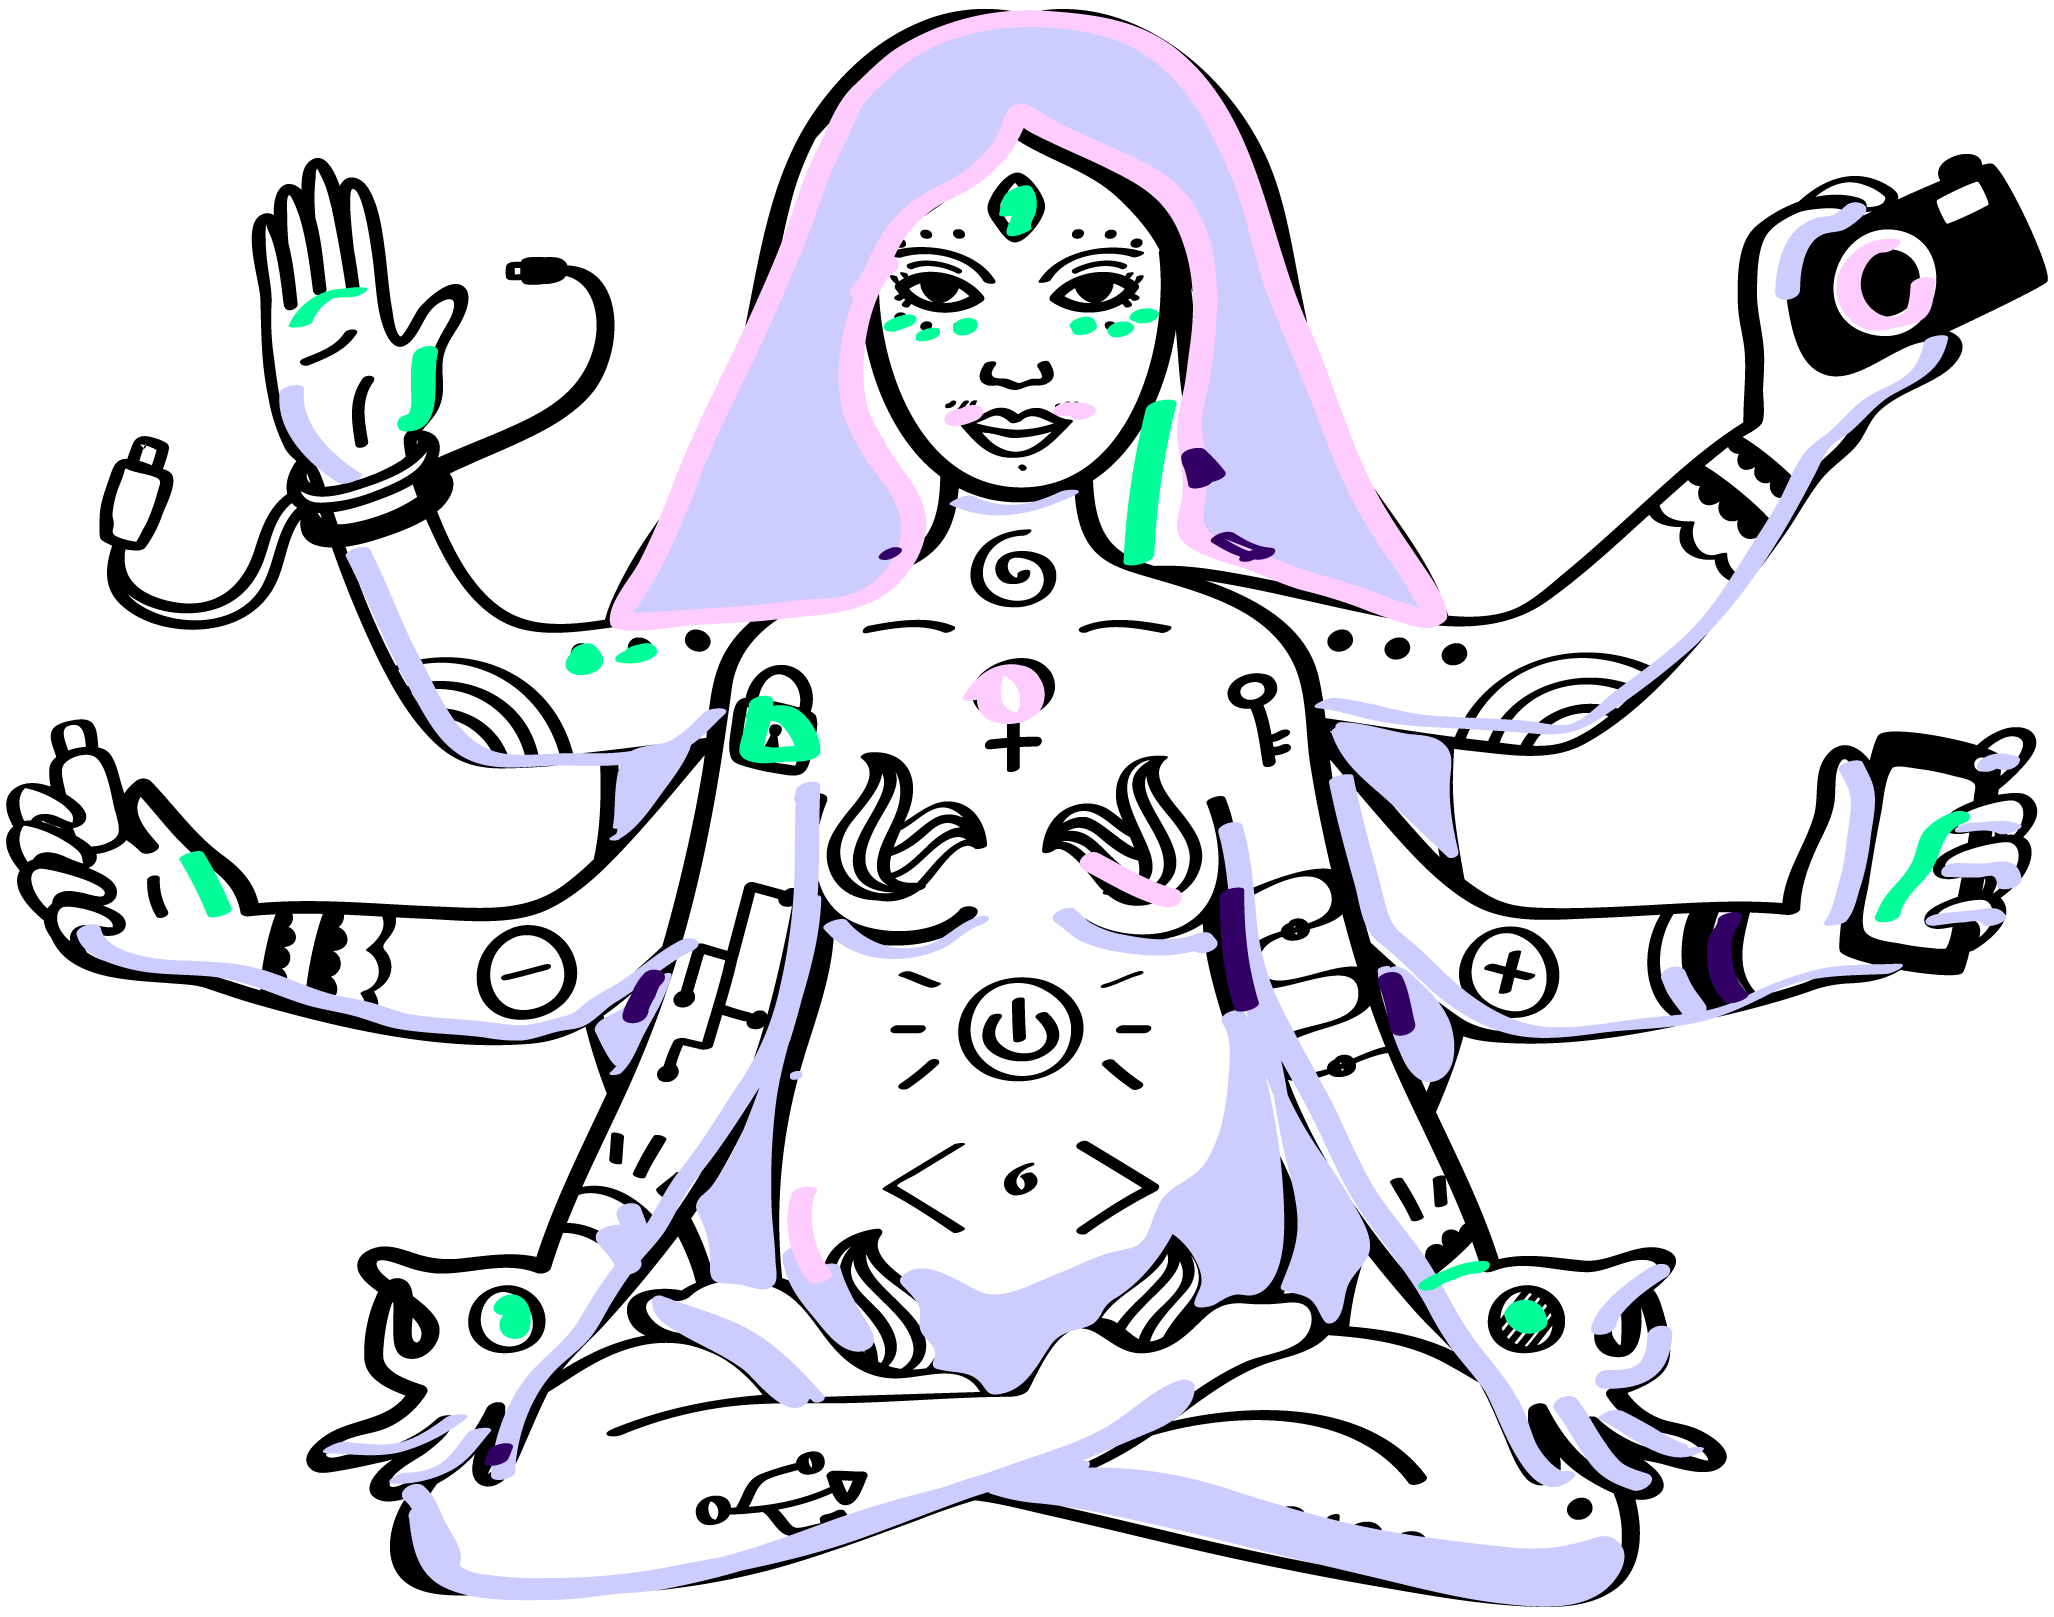 Graphic illustration of a cyborg goddess with long purple hair sitting in a lotus position with six hands holding a phone, a camera, a flash drive, a wire as a bracelet, and power buttons and electronic symbols tattooed on her body.